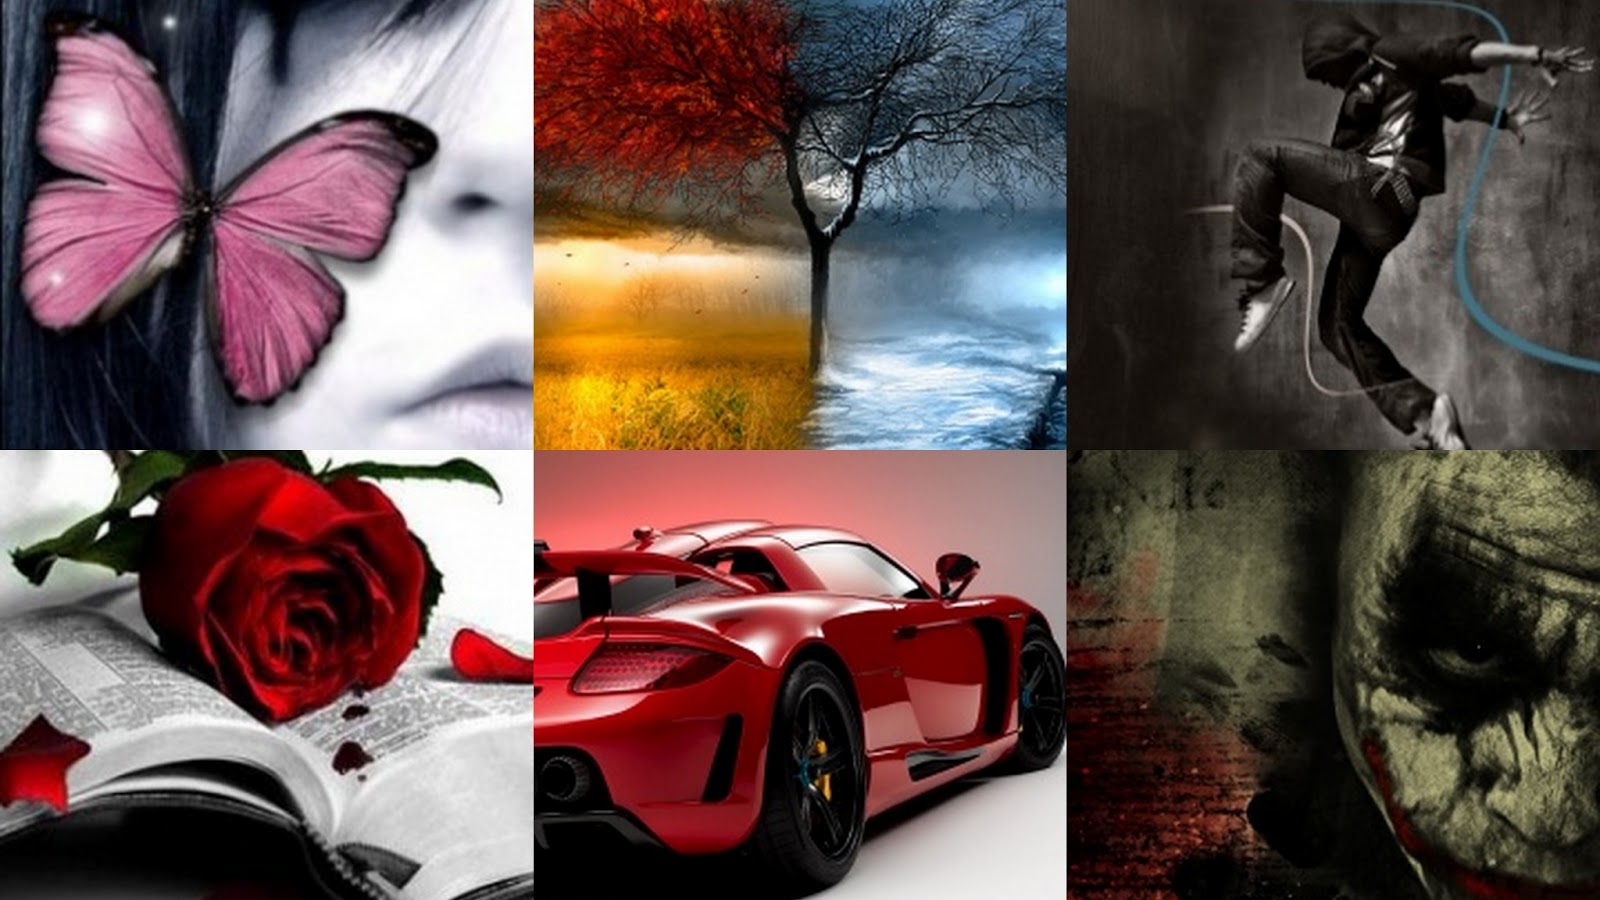 Download Wallpapers Pack 1 Pack Contains 100 Hd Pics - Rose - HD Wallpaper 